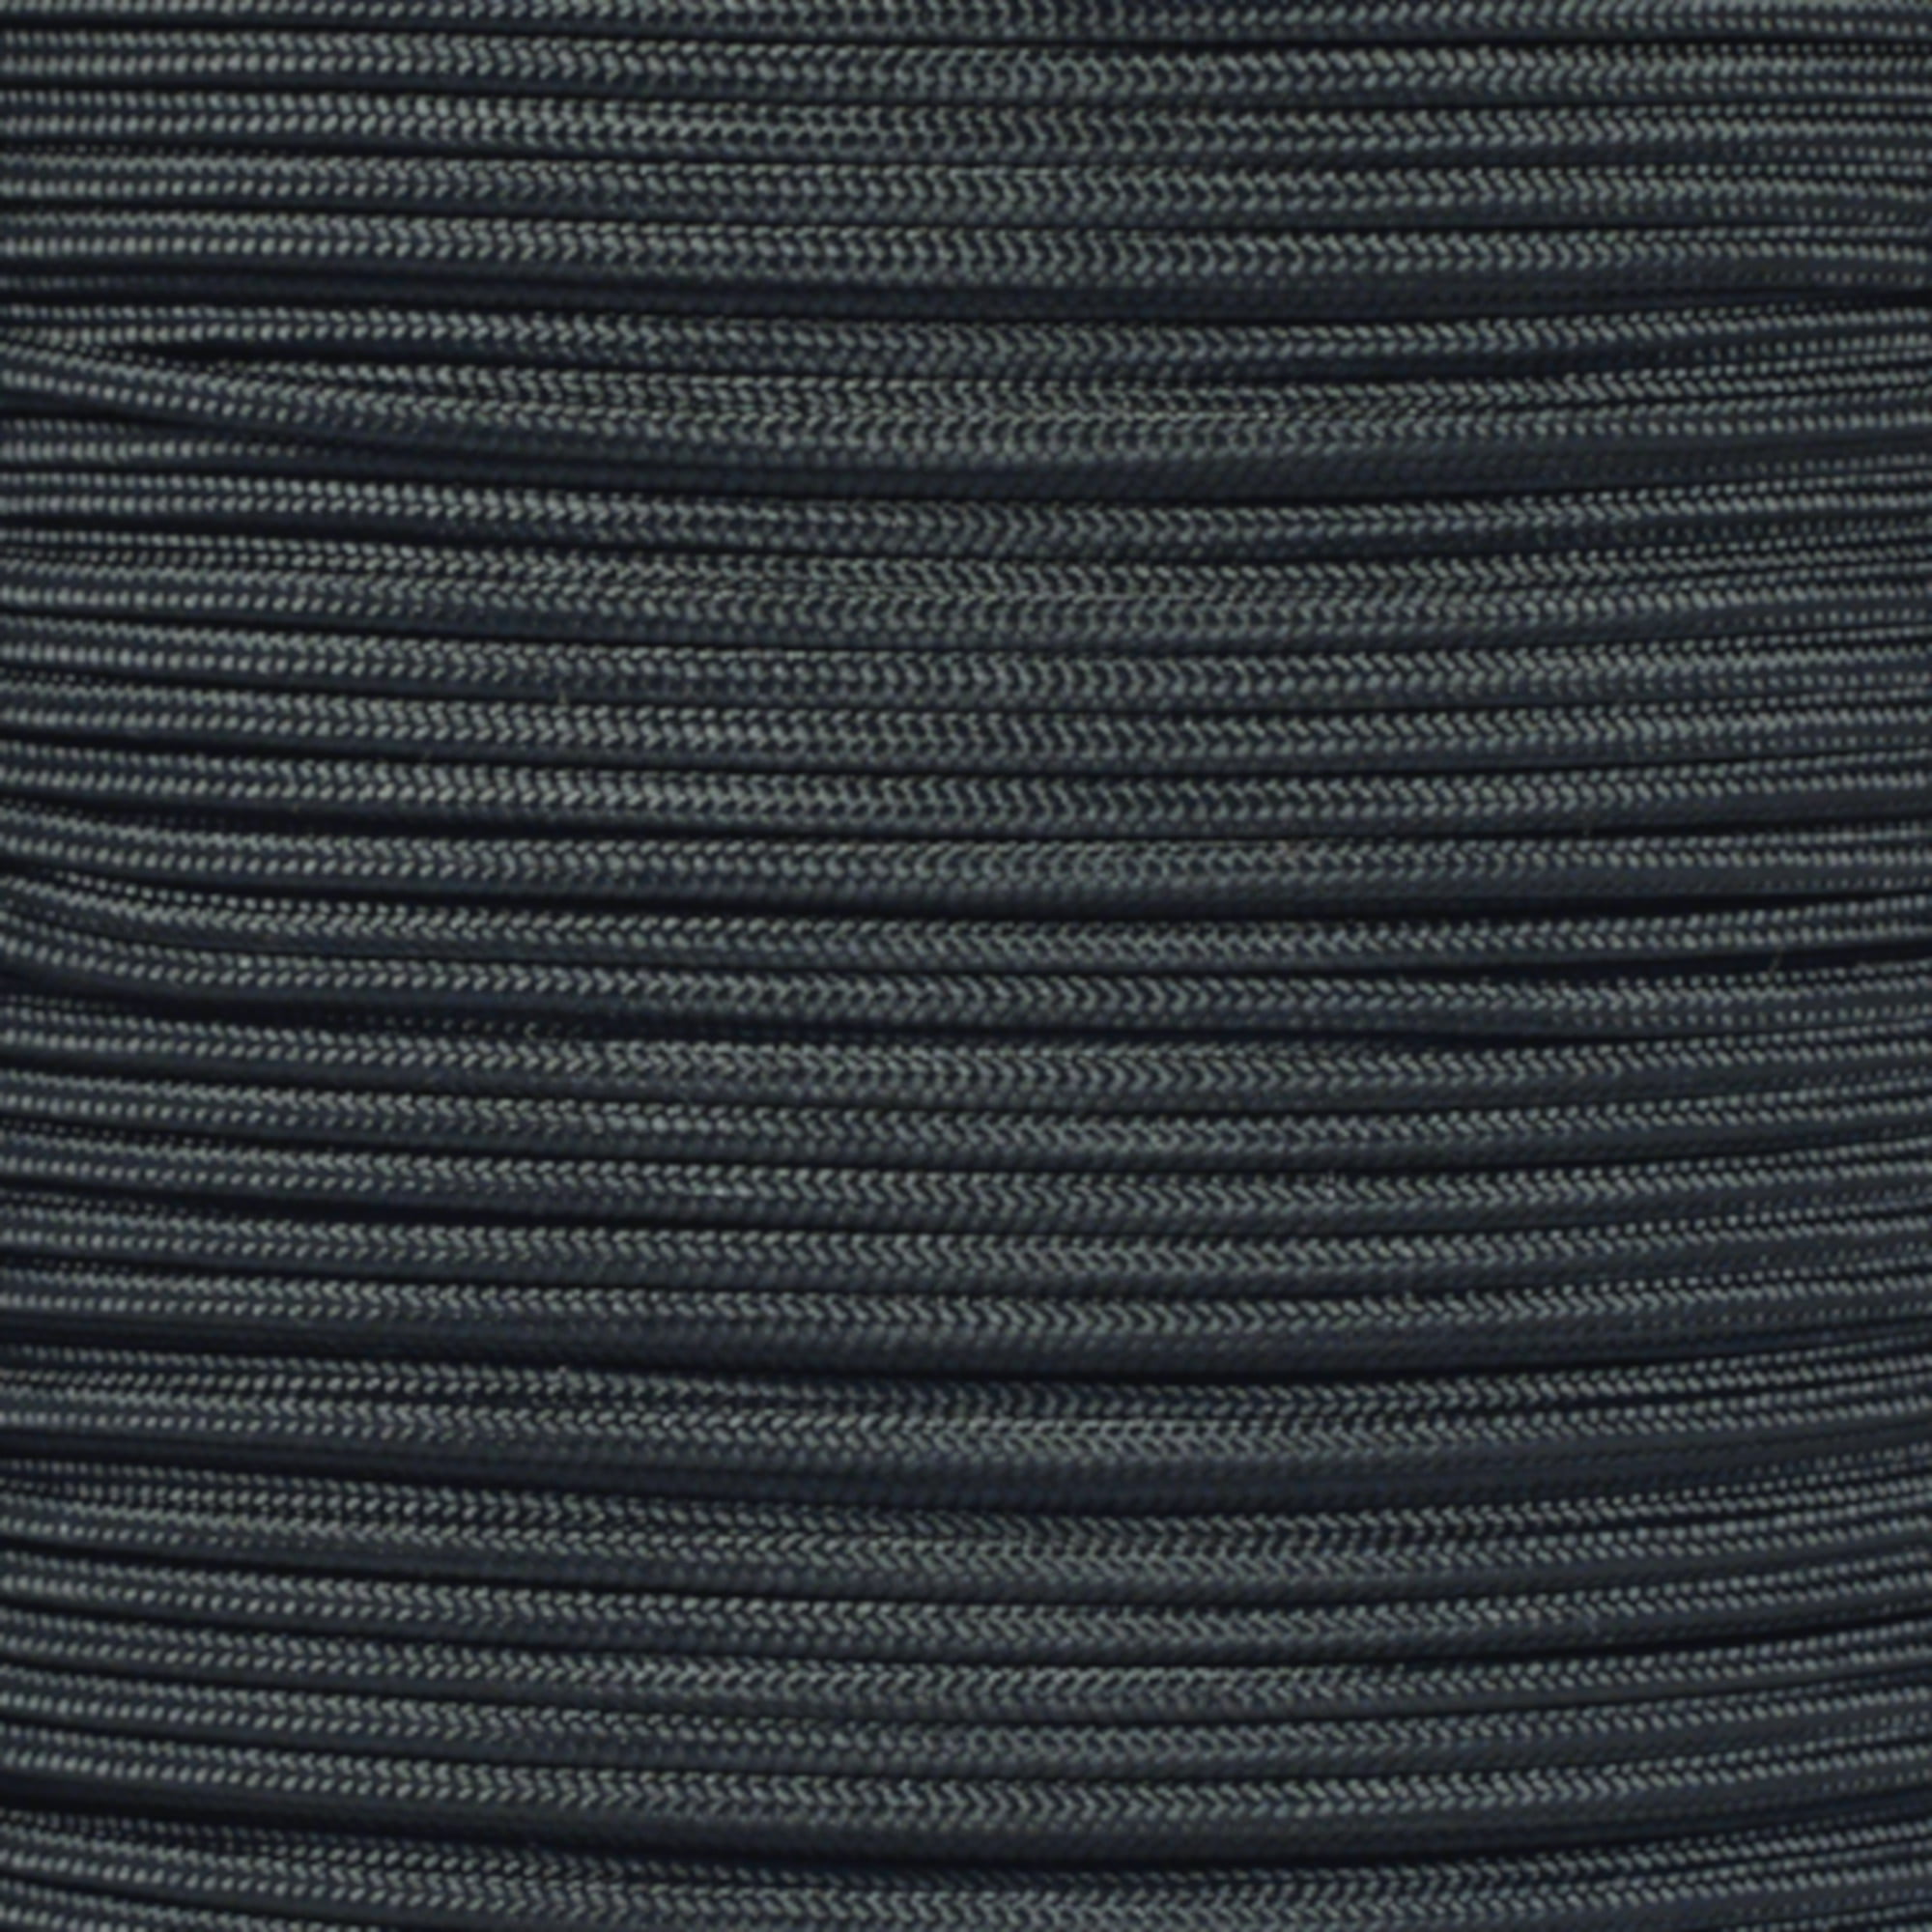 Paracord Planet's Commercial Grade 275lb Tensile Strength Paracord